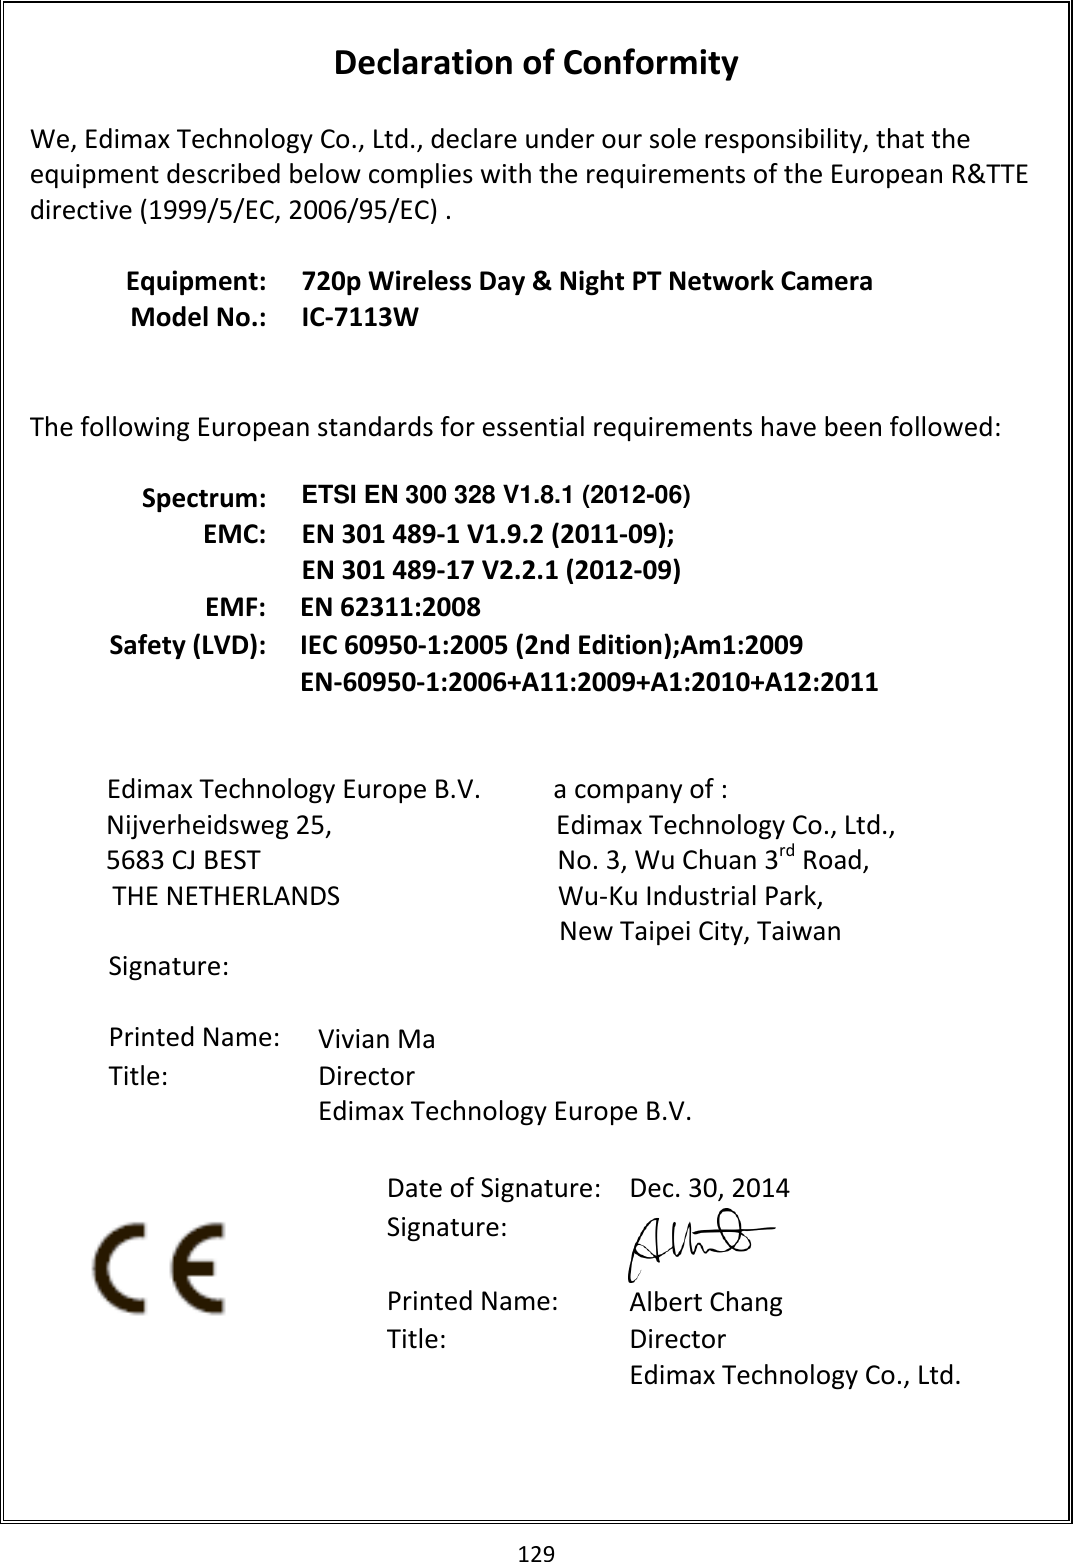 129   Declaration of Conformity  We, Edimax Technology Co., Ltd., declare under our sole responsibility, that the equipment described below complies with the requirements of the European R&amp;TTE directive (1999/5/EC, 2006/95/EC) .  Equipment: 720p Wireless Day &amp; Night PT Network Camera Model No.: IC-7113W    The following European standards for essential requirements have been followed:  Spectrum: ETSI EN 300 328 V1.8.1 (2012-06) EMC: EN 301 489-1 V1.9.2 (2011-09); EN 301 489-17 V2.2.1 (2012-09) EMF: EN 62311:2008 Safety (LVD): IEC 60950-1:2005 (2nd Edition);Am1:2009 EN-60950-1:2006+A11:2009+A1:2010+A12:2011                          Edimax Technology Europe B.V.           a company of : Nijverheidsweg 25,                                  Edimax Technology Co., Ltd., 5683 CJ BEST                                             No. 3, Wu Chuan 3rd Road, THE NETHERLANDS                                 Wu-Ku Industrial Park,  New Taipei City, Taiwan          Date of Signature: Dec. 30, 2014 Signature:  Printed Name: Albert Chang Title: Director Edimax Technology Co., Ltd.  Signature:   Printed Name: Vivian Ma Title:  Director Edimax Technology Europe B.V.   